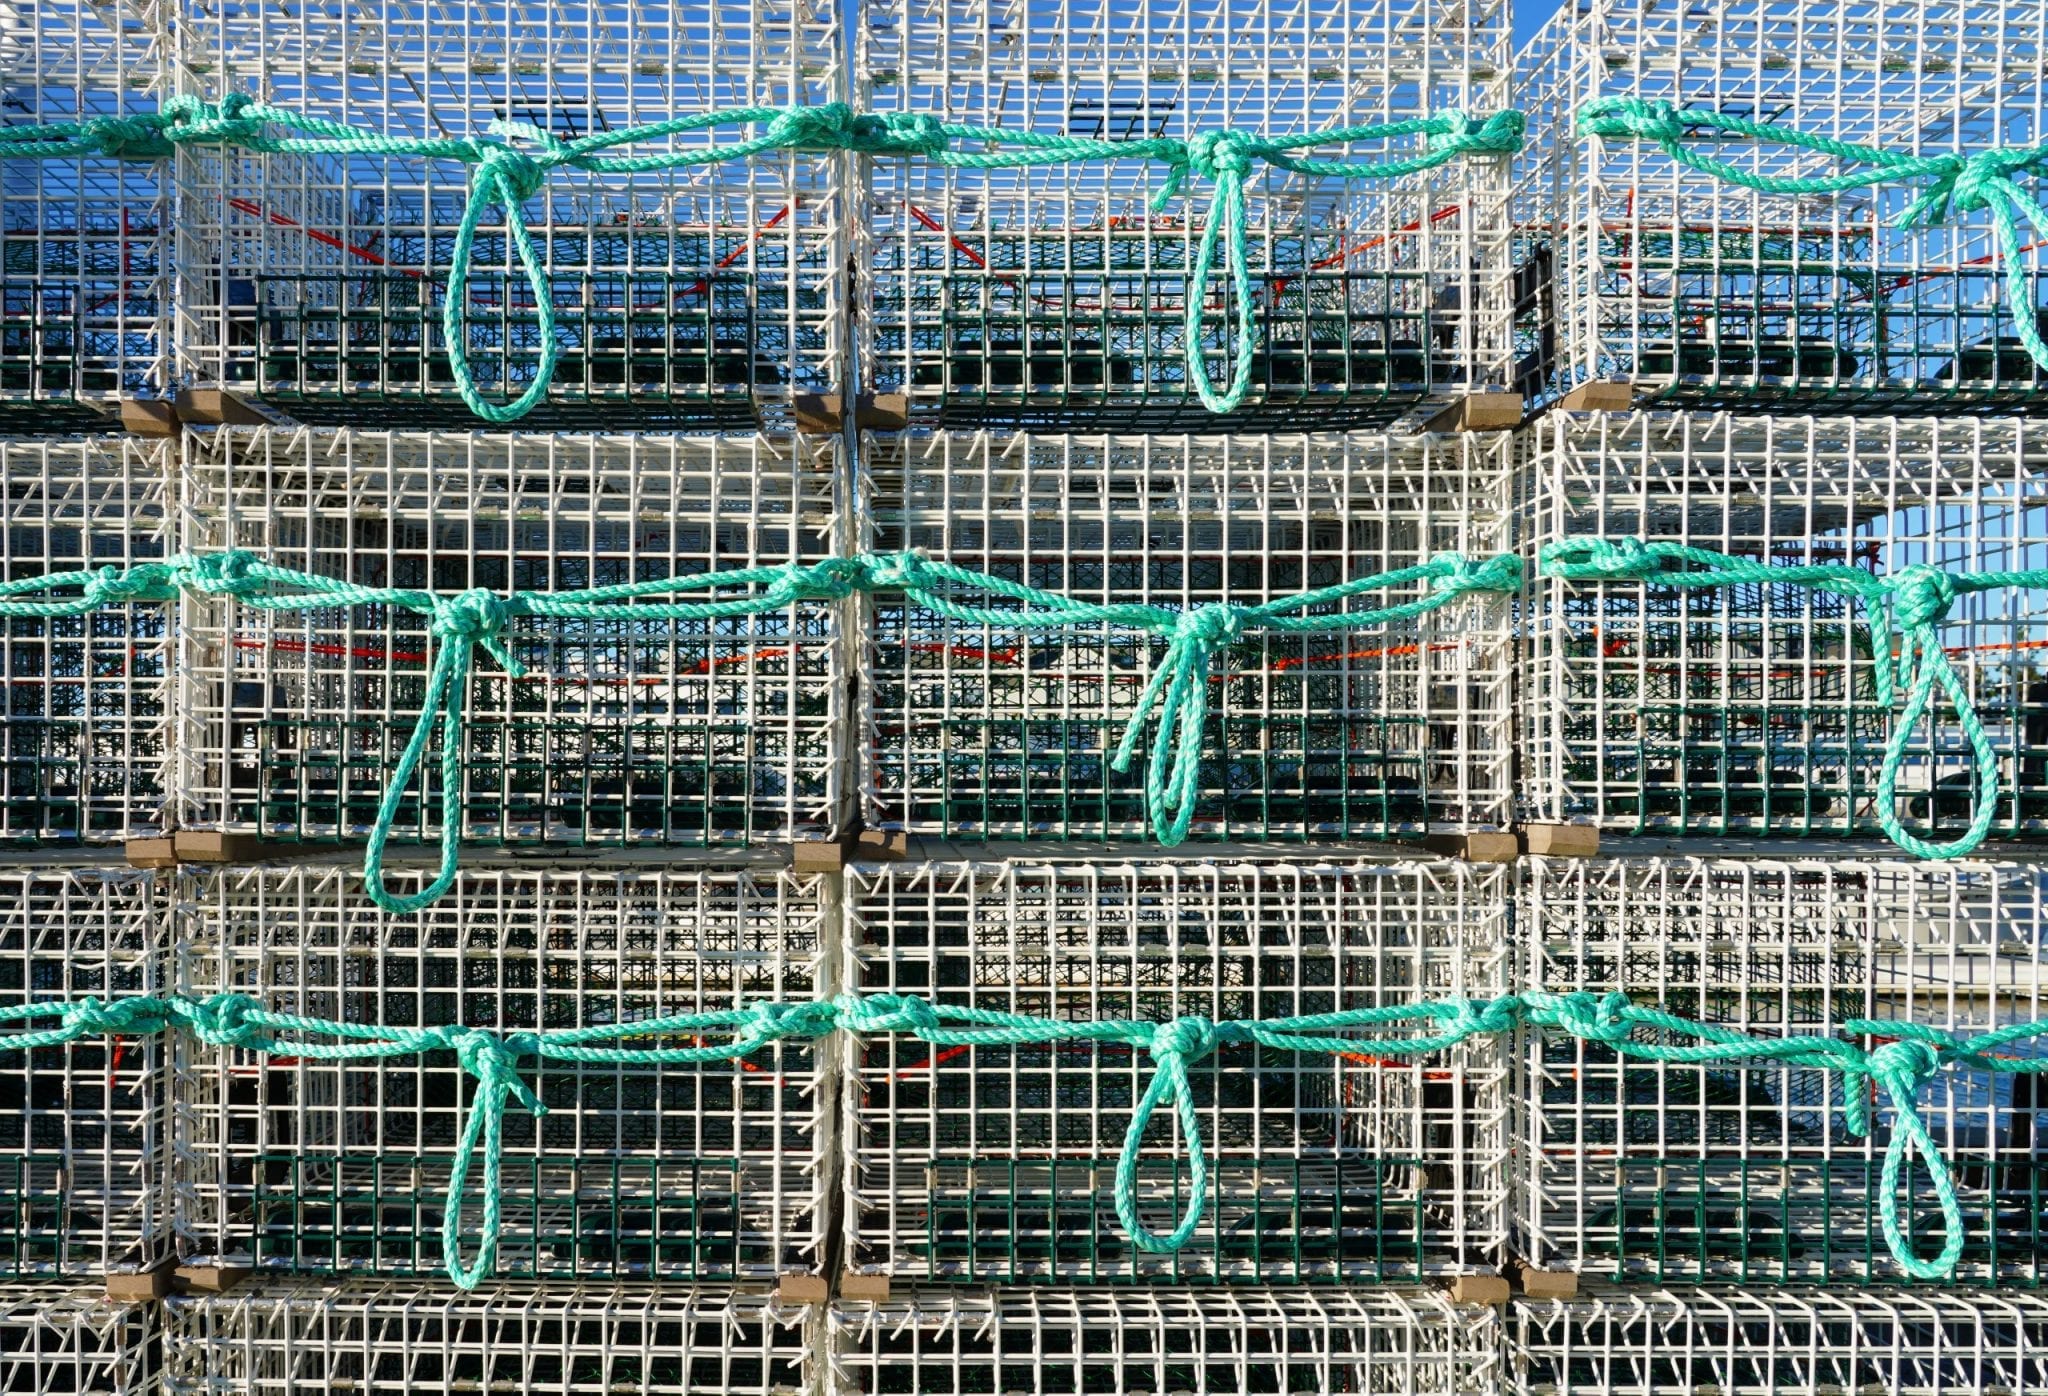 View,Of,Stacks,Of,Lobster,Traps,In,Maine,,United,States